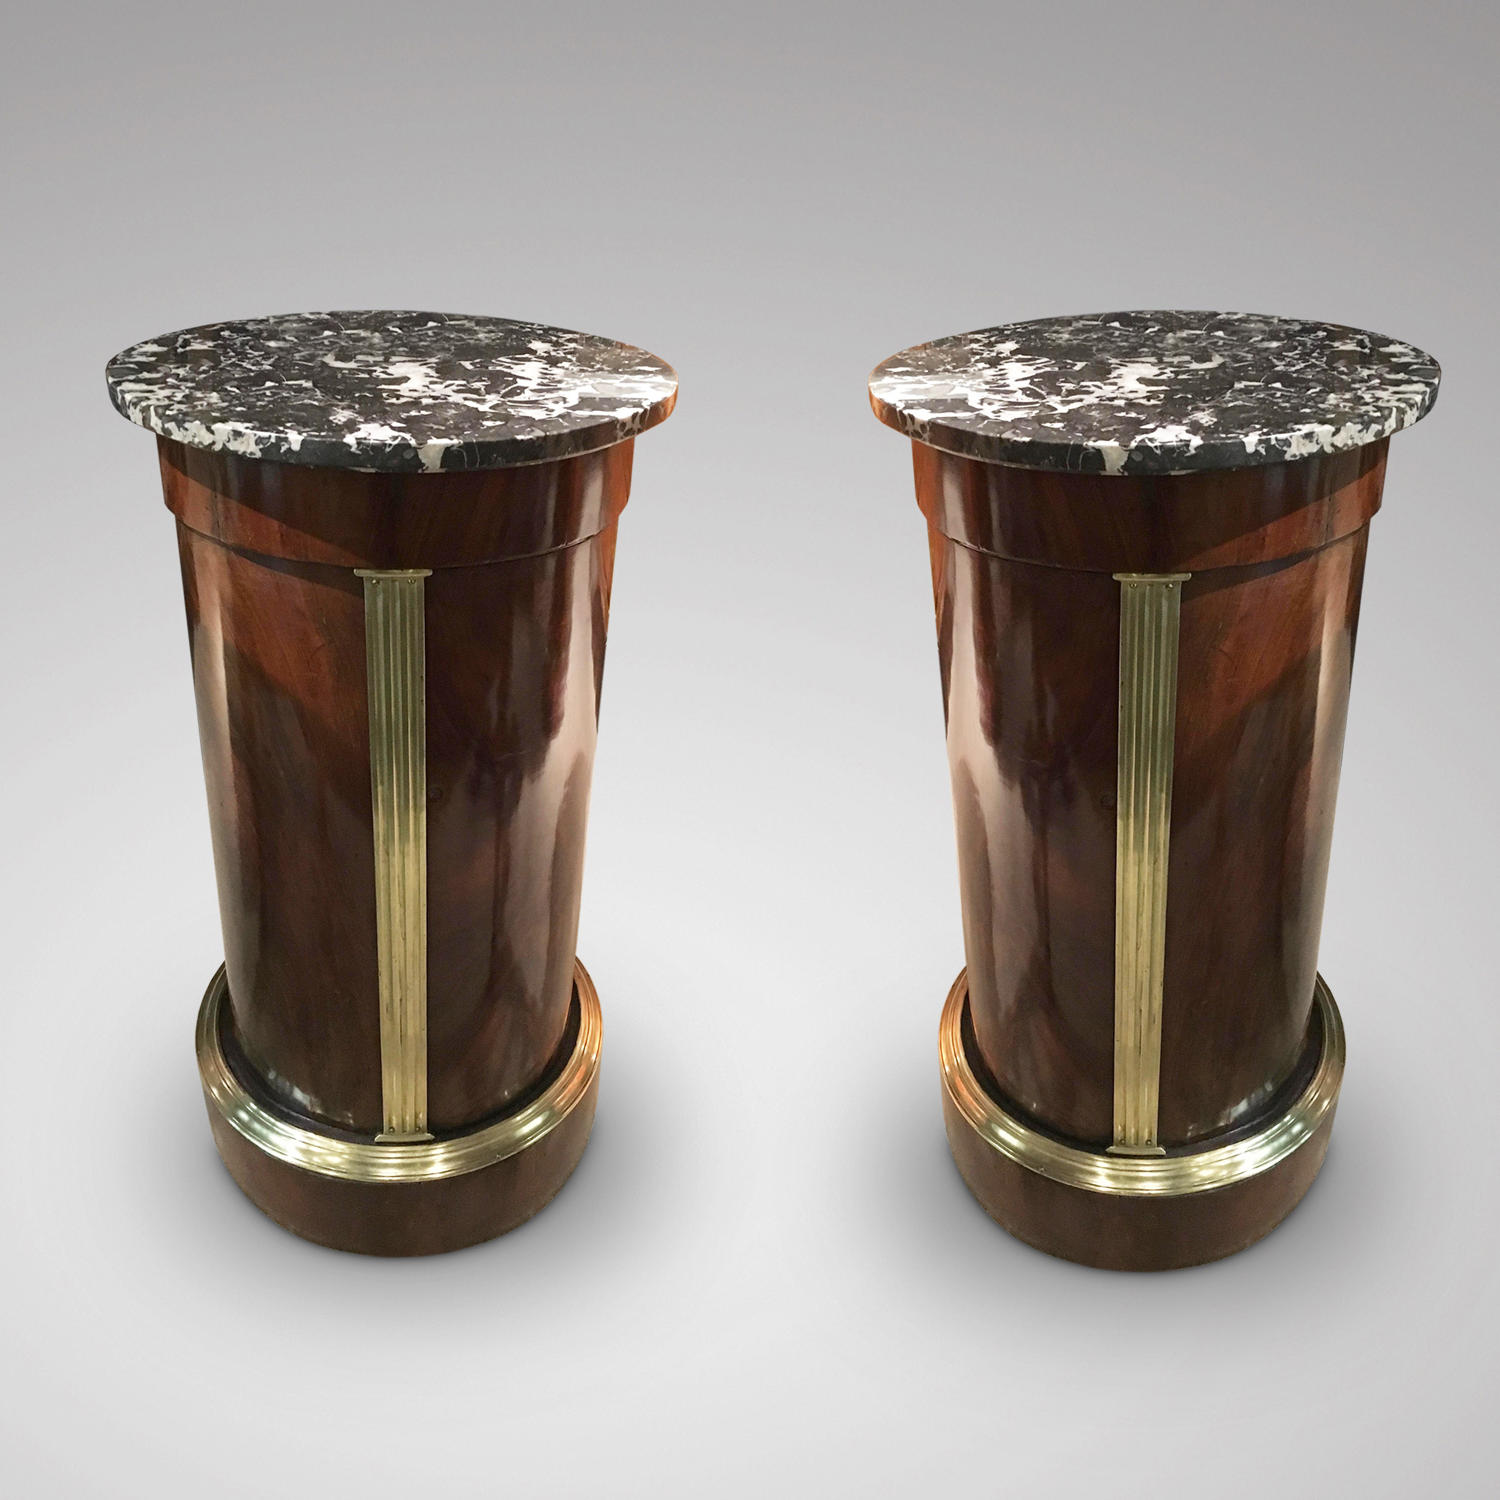 A PAIR OF BALTIC BRASS MOUNTED MAHOGANY COLUMNS